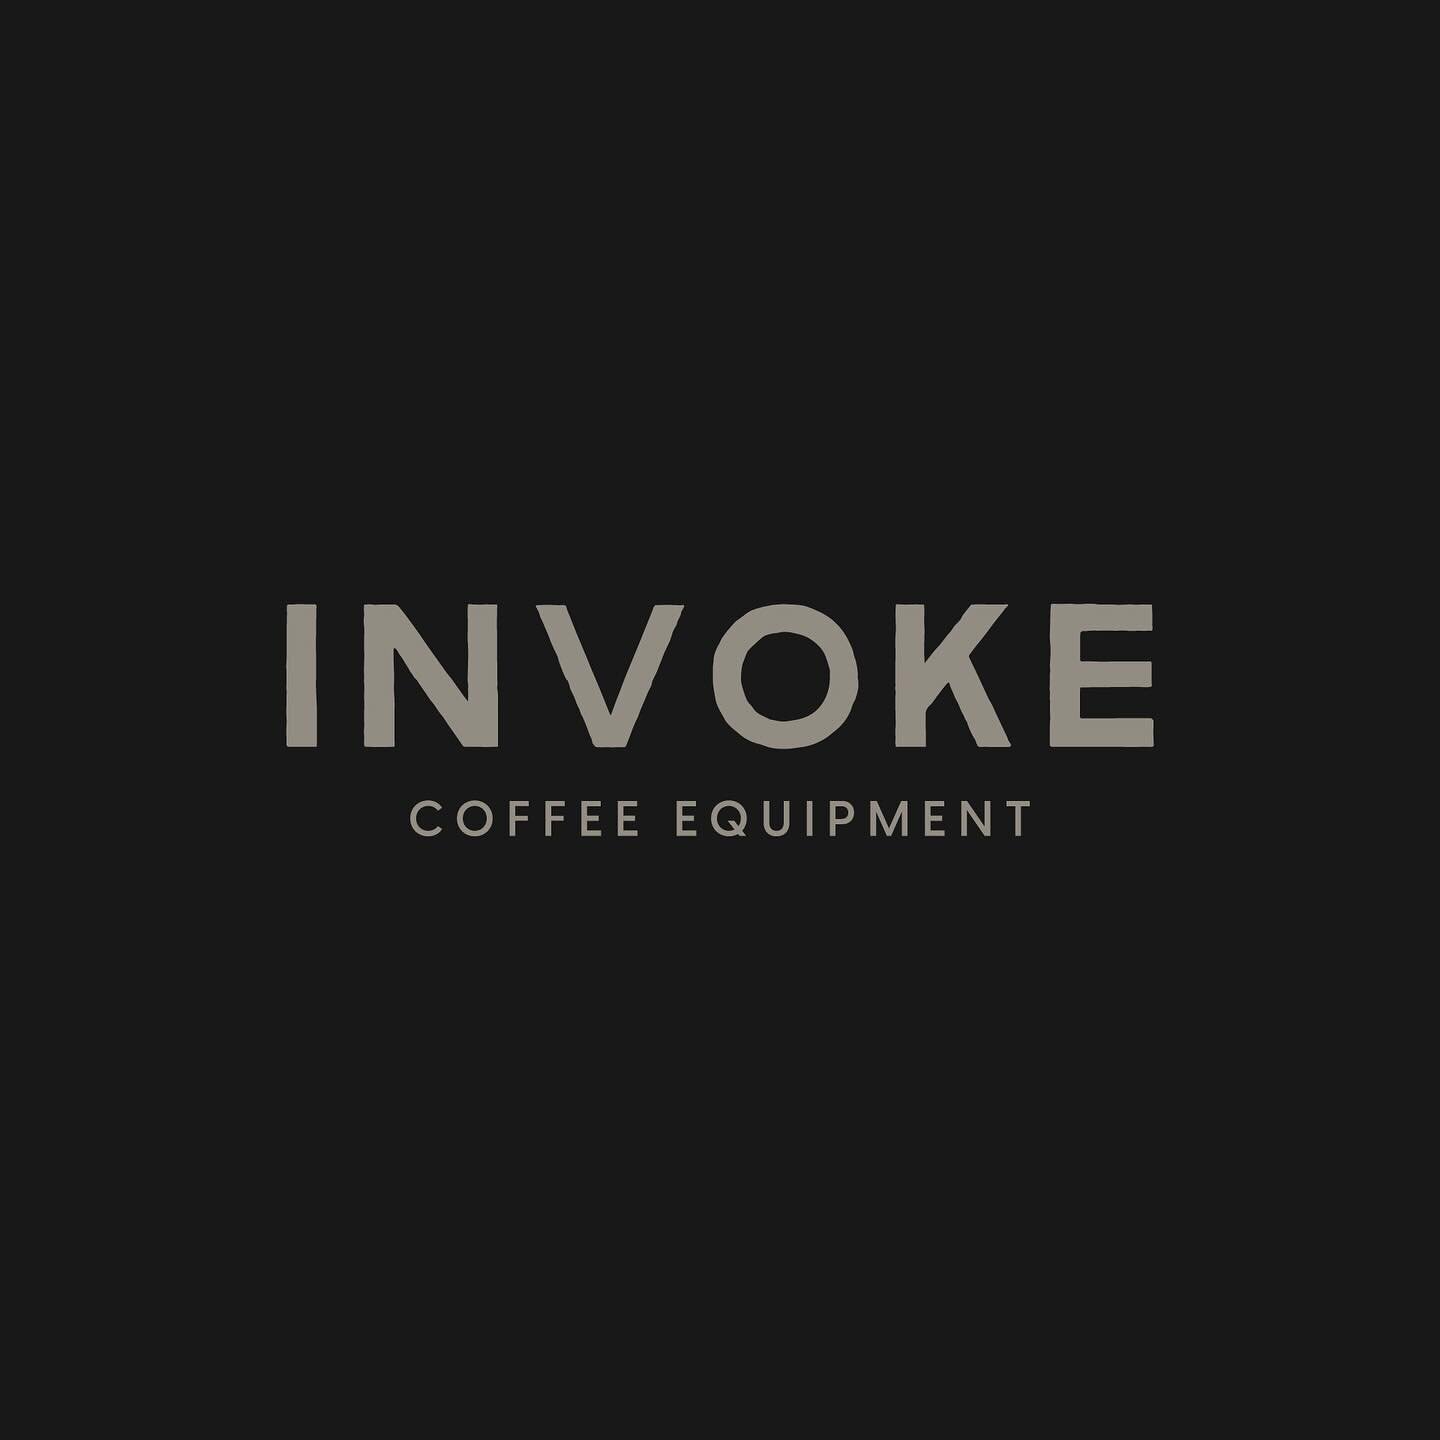 Introducing INVOKE: Coffee Equipment Sales &amp; Service. When Matt approached me with this project, I knew it would be a good one.

I had a lot of fun developing word marks and giving this brand character with a vintage hand-lettered feel.

I&rsquo;